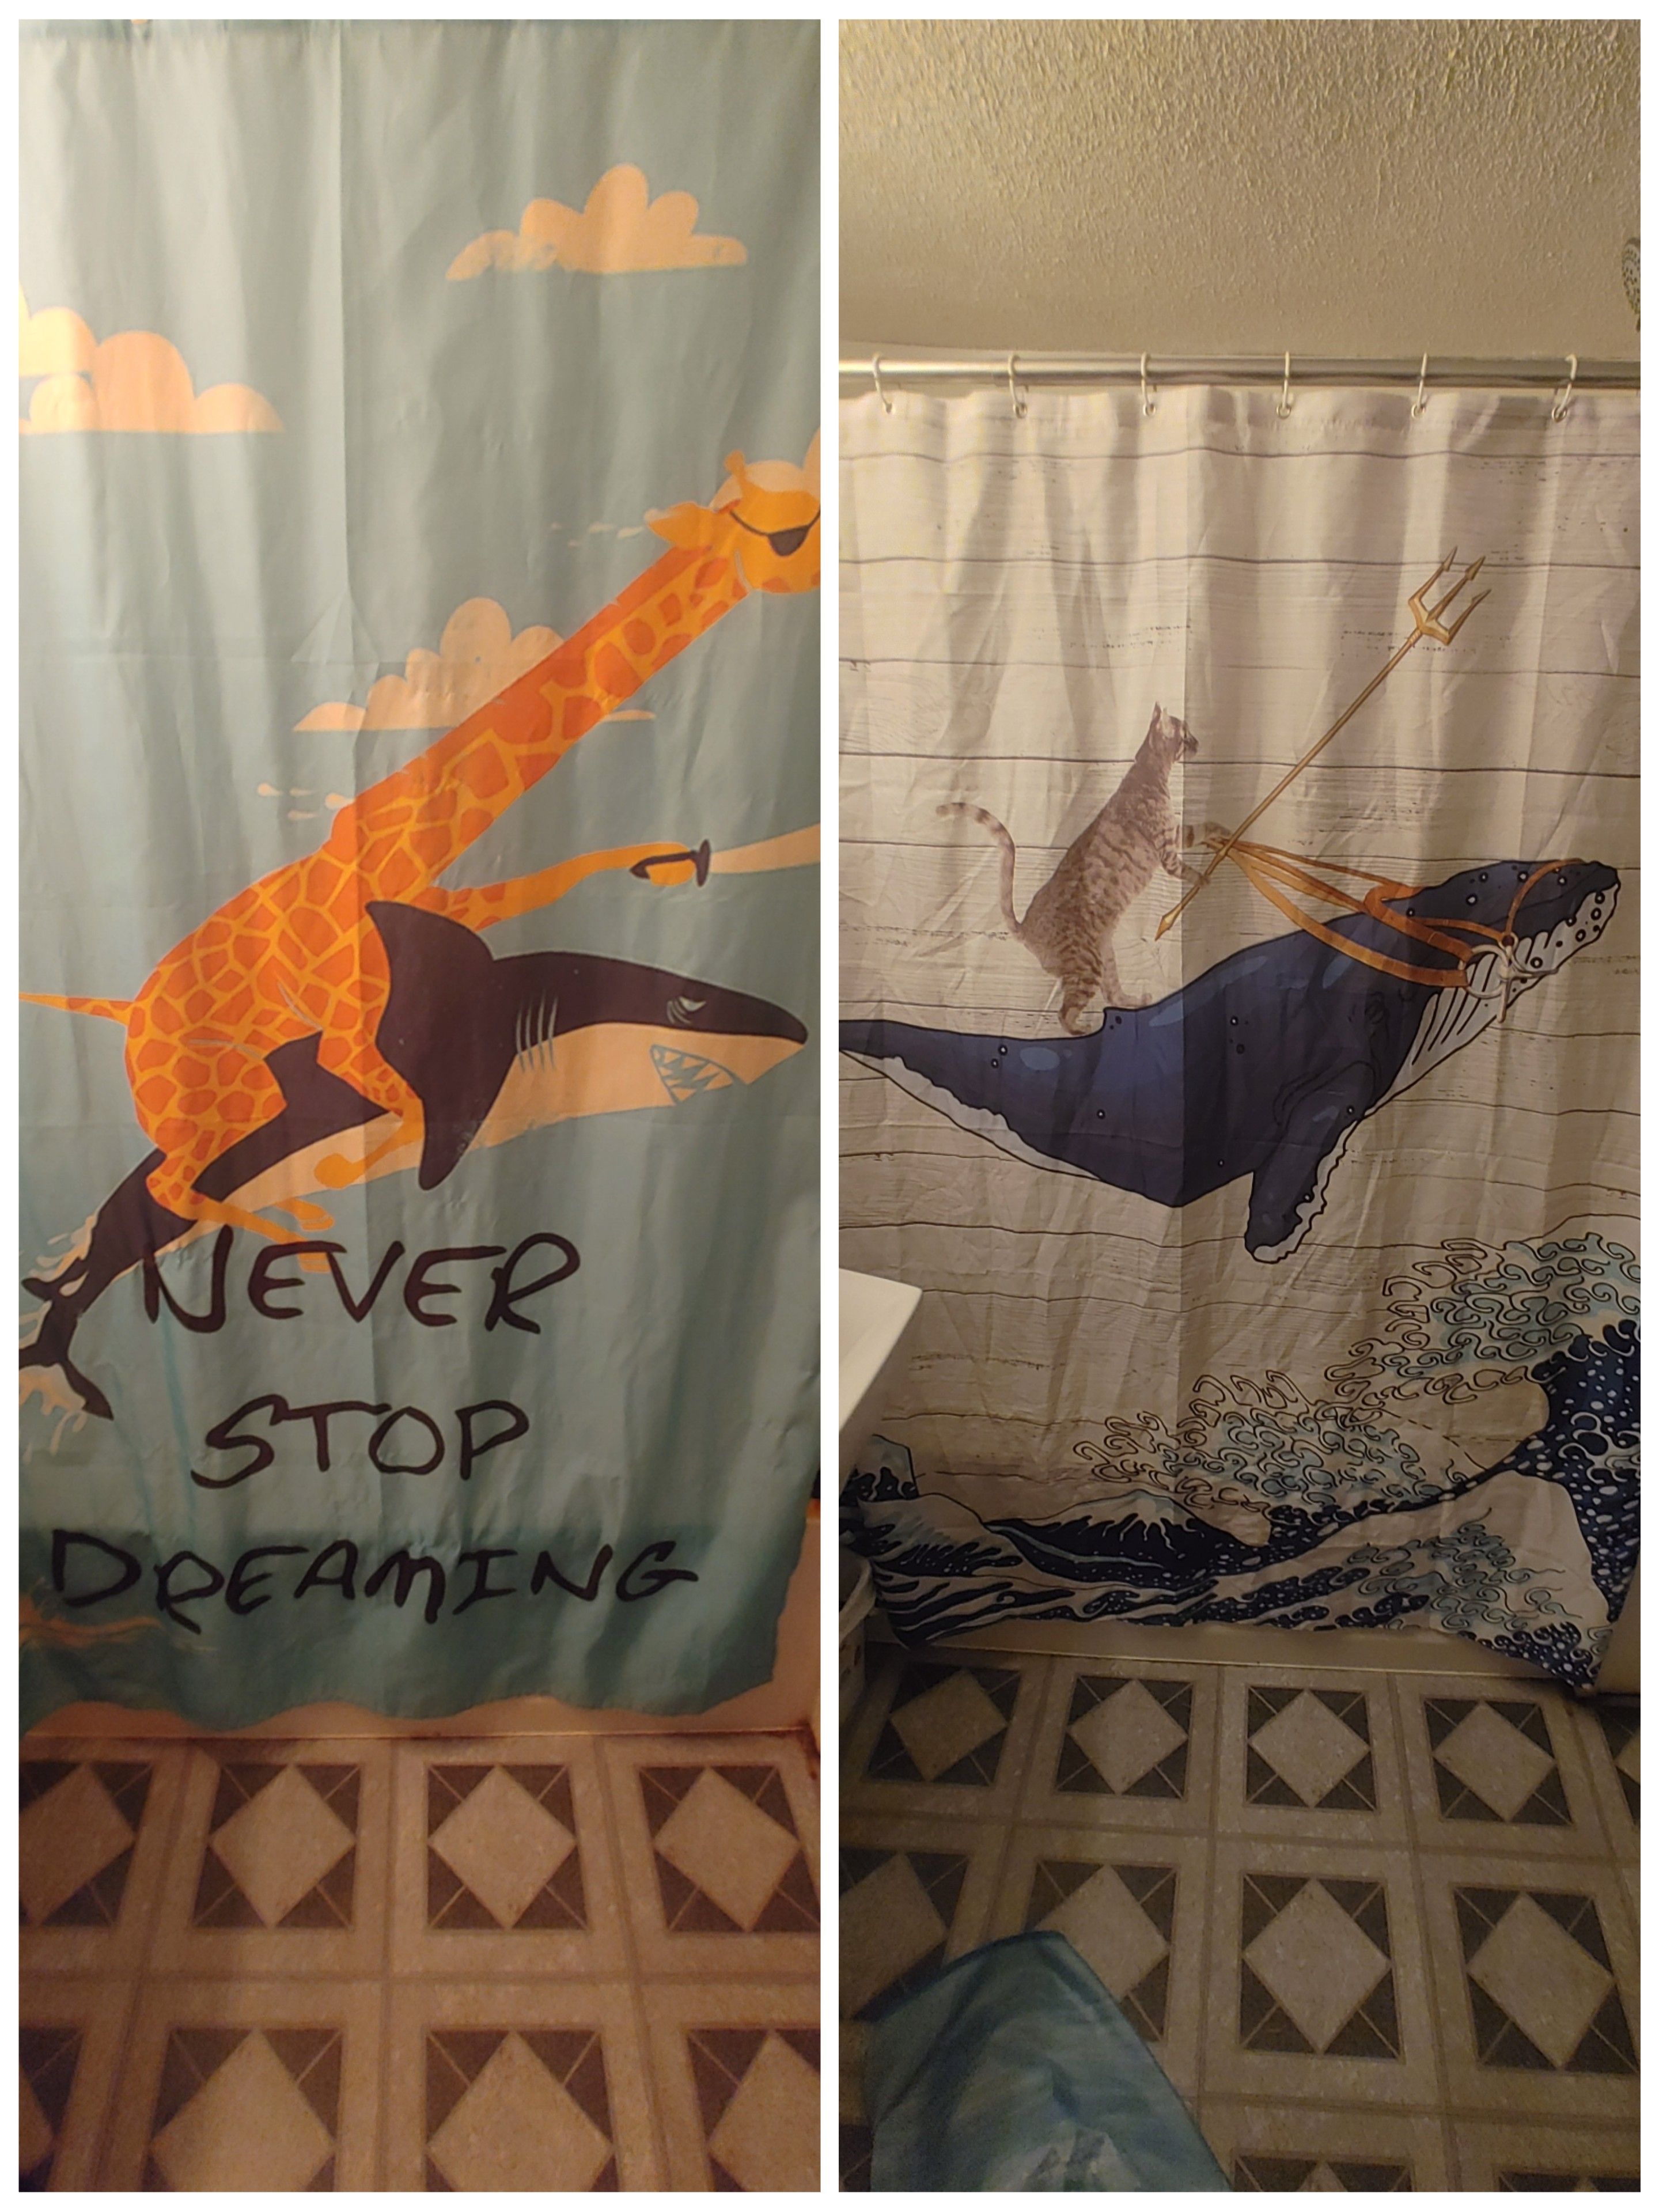 I've had the same giraffe shower curtain since I moved in a few years ago. At 26, I thought it was time to get a more serious curtain.